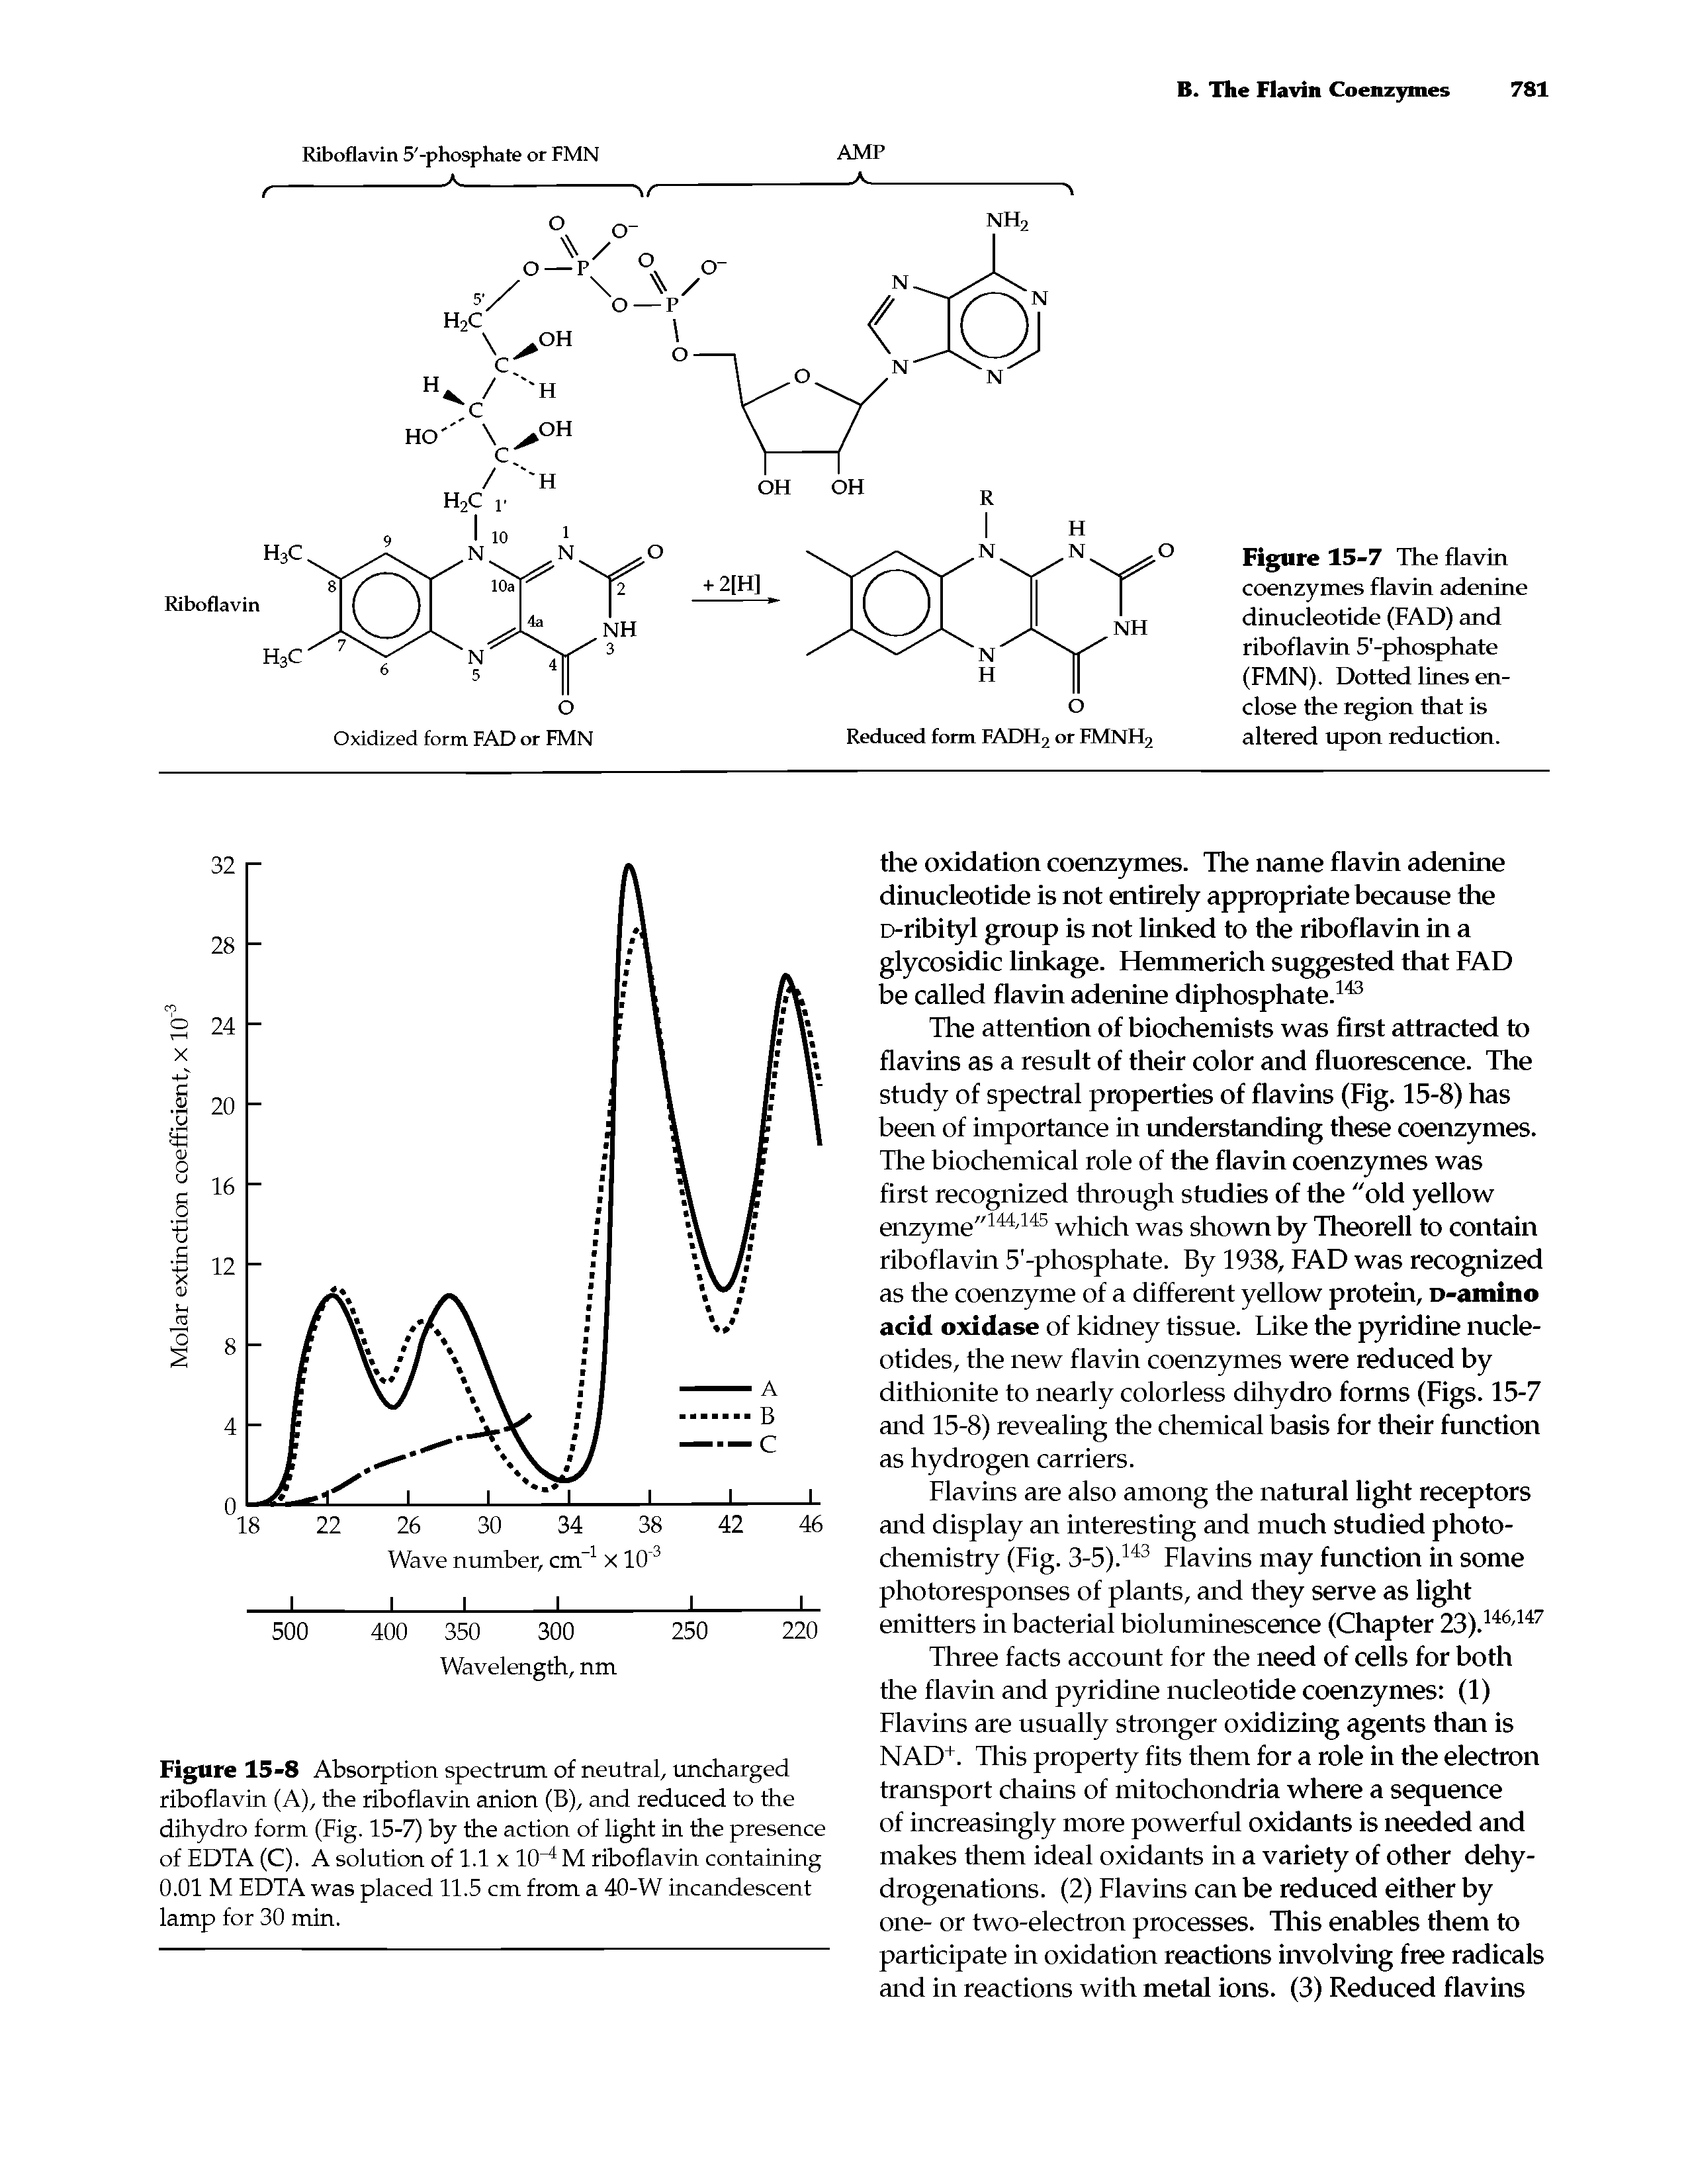 Figure 15-8 Absorption spectrum of neutral, uncharged riboflavin (A), the riboflavin anion (B), and reduced to the dihydro form (Fig. 15-7) by the action of light in the presence of EDTA (C). A solution of 1.1 x 1CF4 M riboflavin containing 0.01 M EDTA was placed 11.5 cm from a 40-W incandescent lamp for 30 min.